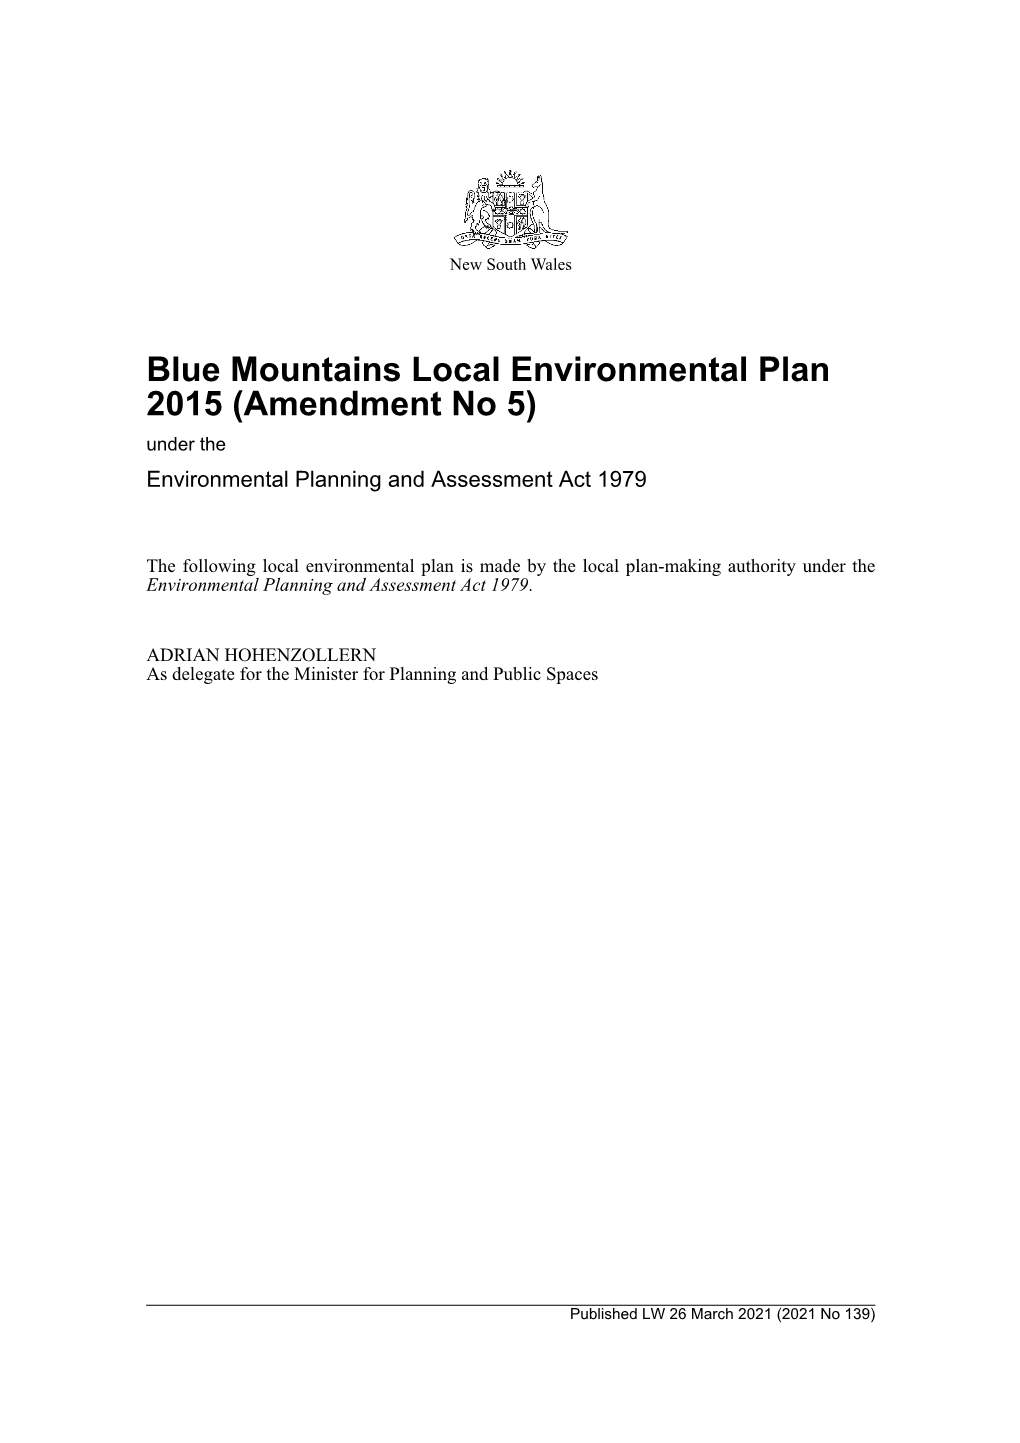 Blue Mountains Local Environmental Plan 2015 (Amendment No 5) Under the Environmental Planning and Assessment Act 1979